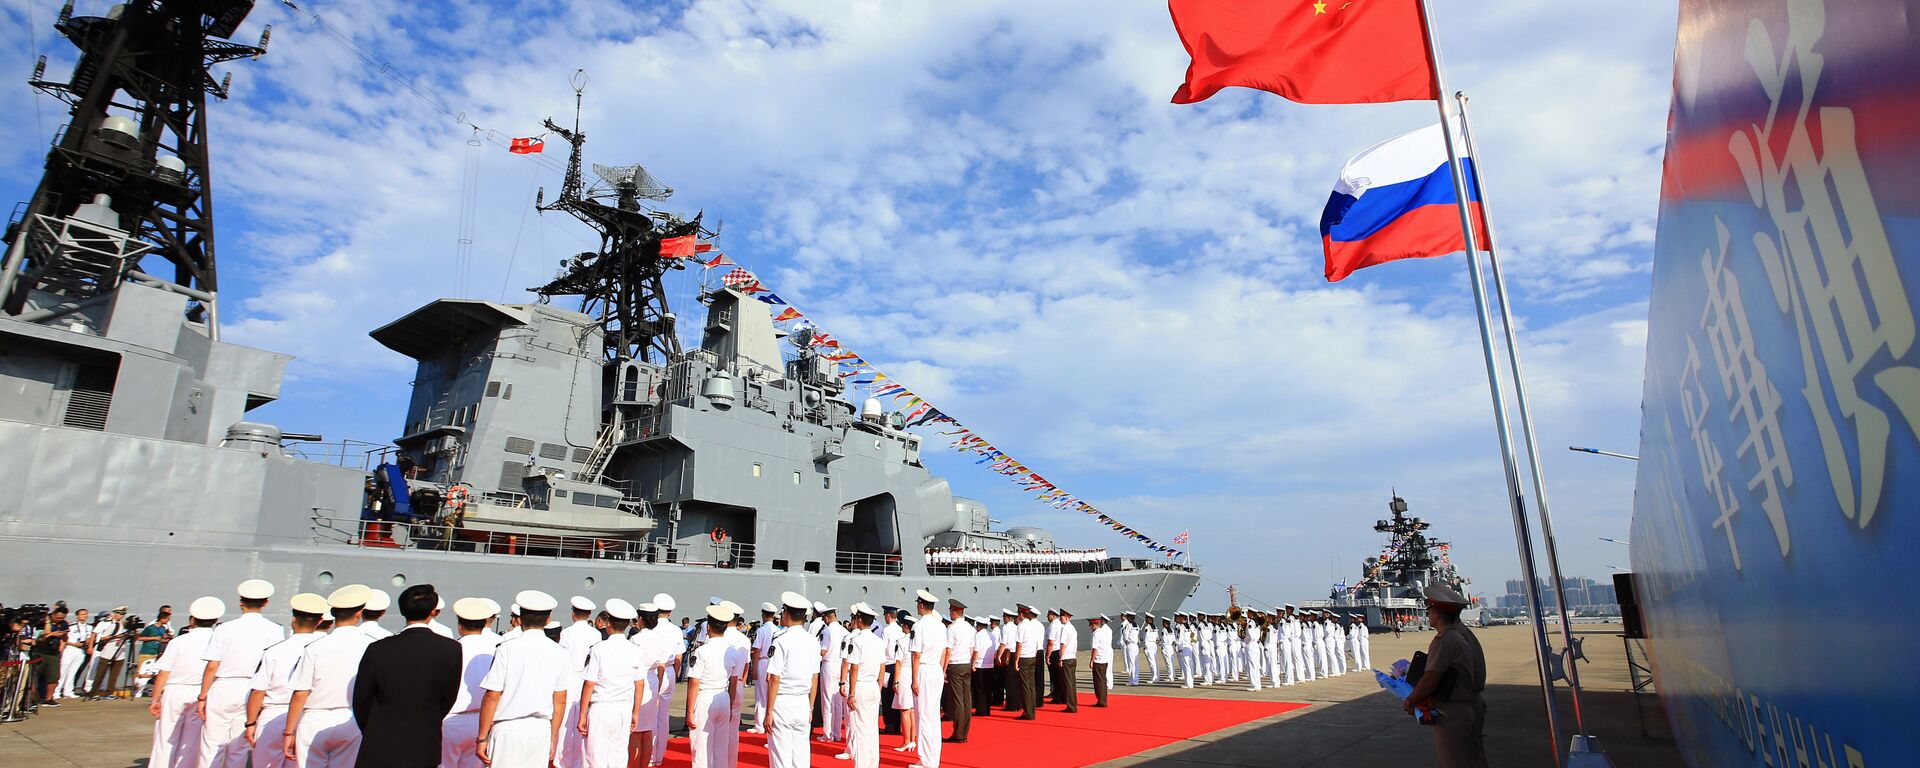 In this photo released by China's Xinhua News Agency, officers and soldiers of China's People's Liberation Army (PLA) Navy hold a welcome ceremony as a Russian naval ship arrives in port in Zhanjiang in southern China's Guangdong Province, Monday, Sept. 12, 2016 - Sputnik International, 1920, 13.08.2021